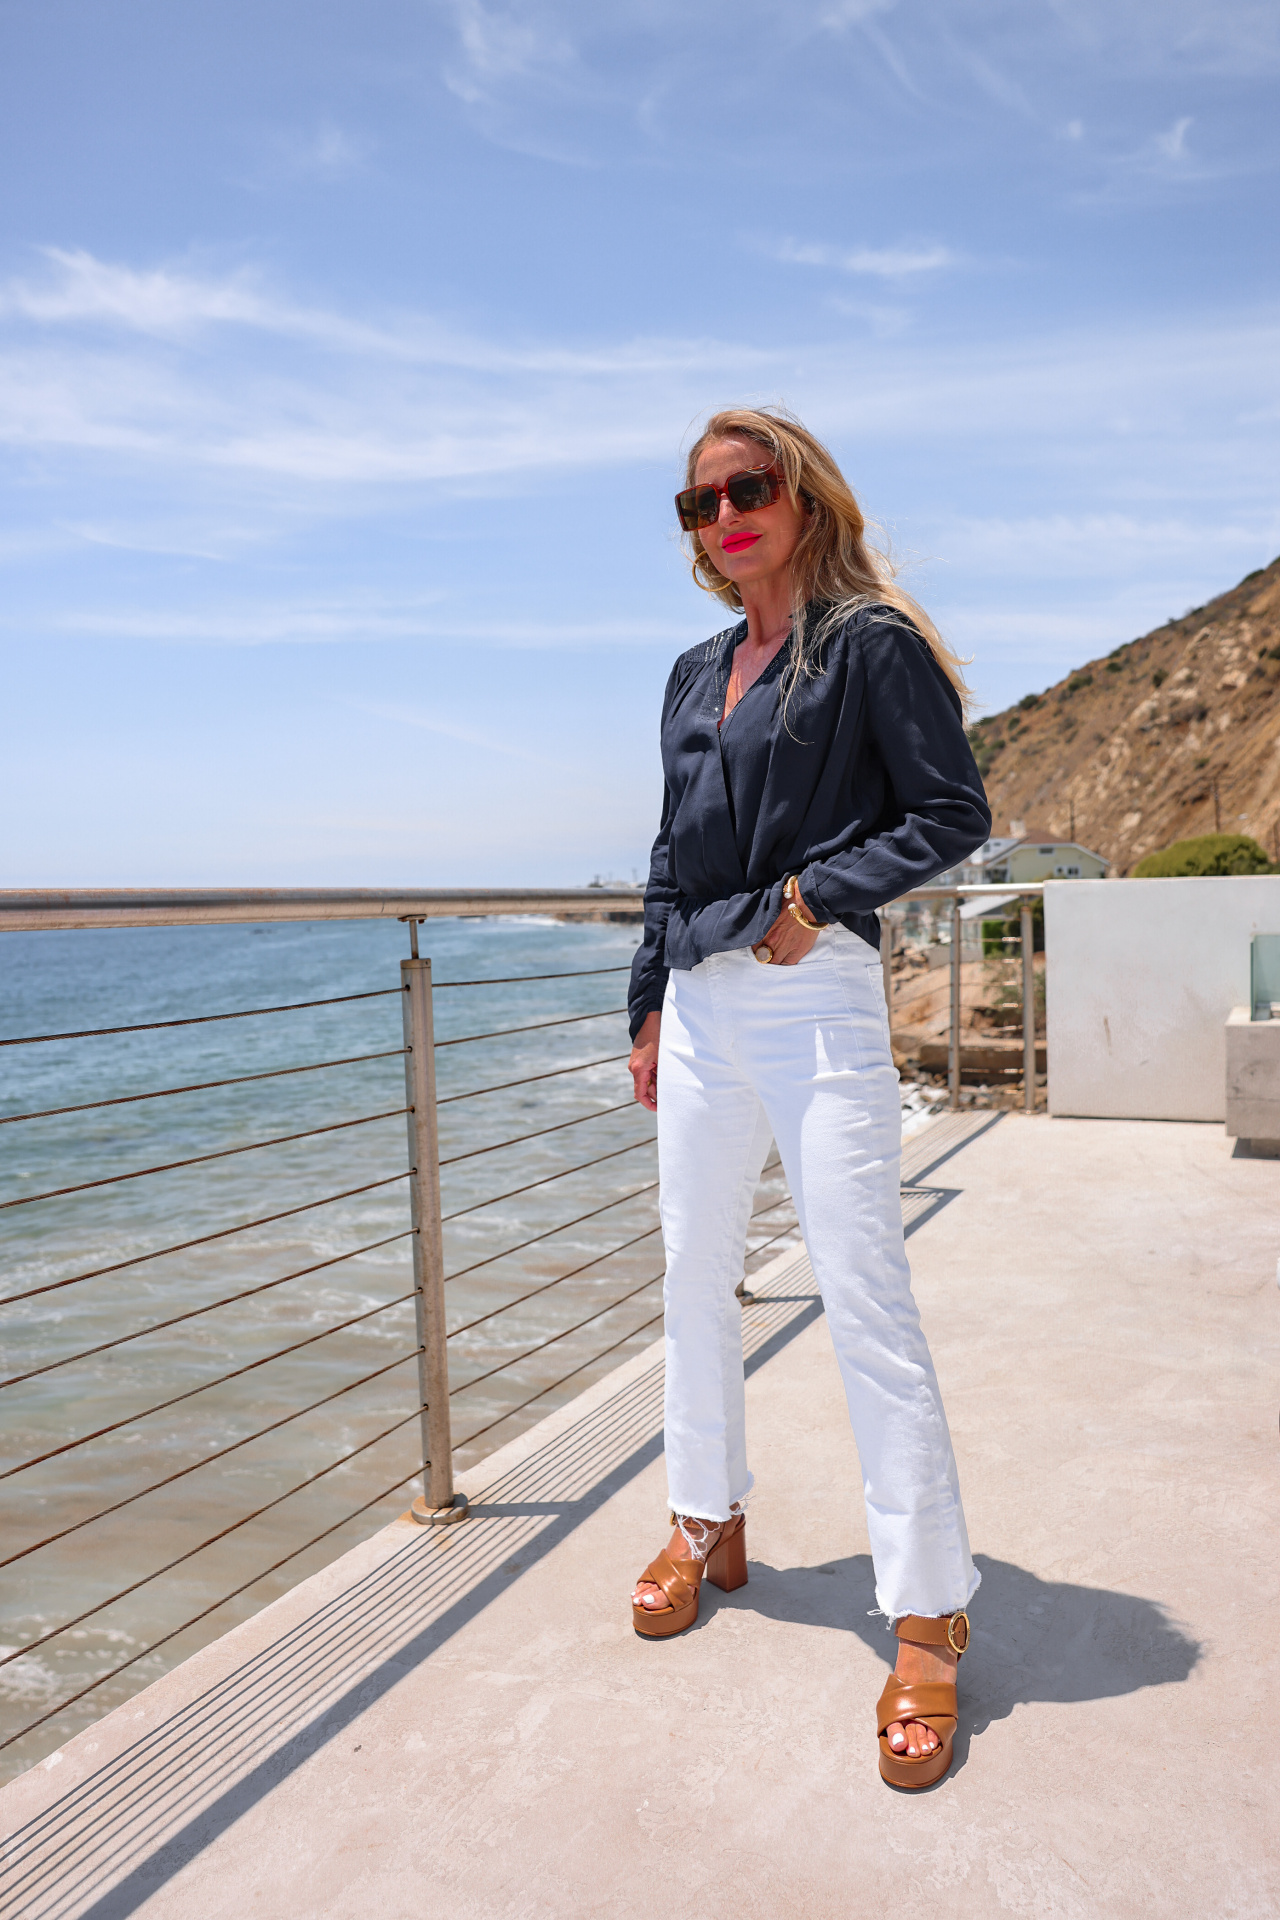 summer mom style, best summer mom outfits, summer mom outfits 2022, casual mom outfits summer, stylish mom outfits 2022, fashion for moms in their 30s, fashion for moms in their 40s, cute mom outfits, casual mom outfits, erin busbee, busbee style, fashion over 40, malibu, california, navy zadig & voltaire faux wrap front top, white mother hustler jeans, see by chloe platform heels, saint laurent square sunglasses, paco rabbane chunky gold necklace, dean davidson hoops